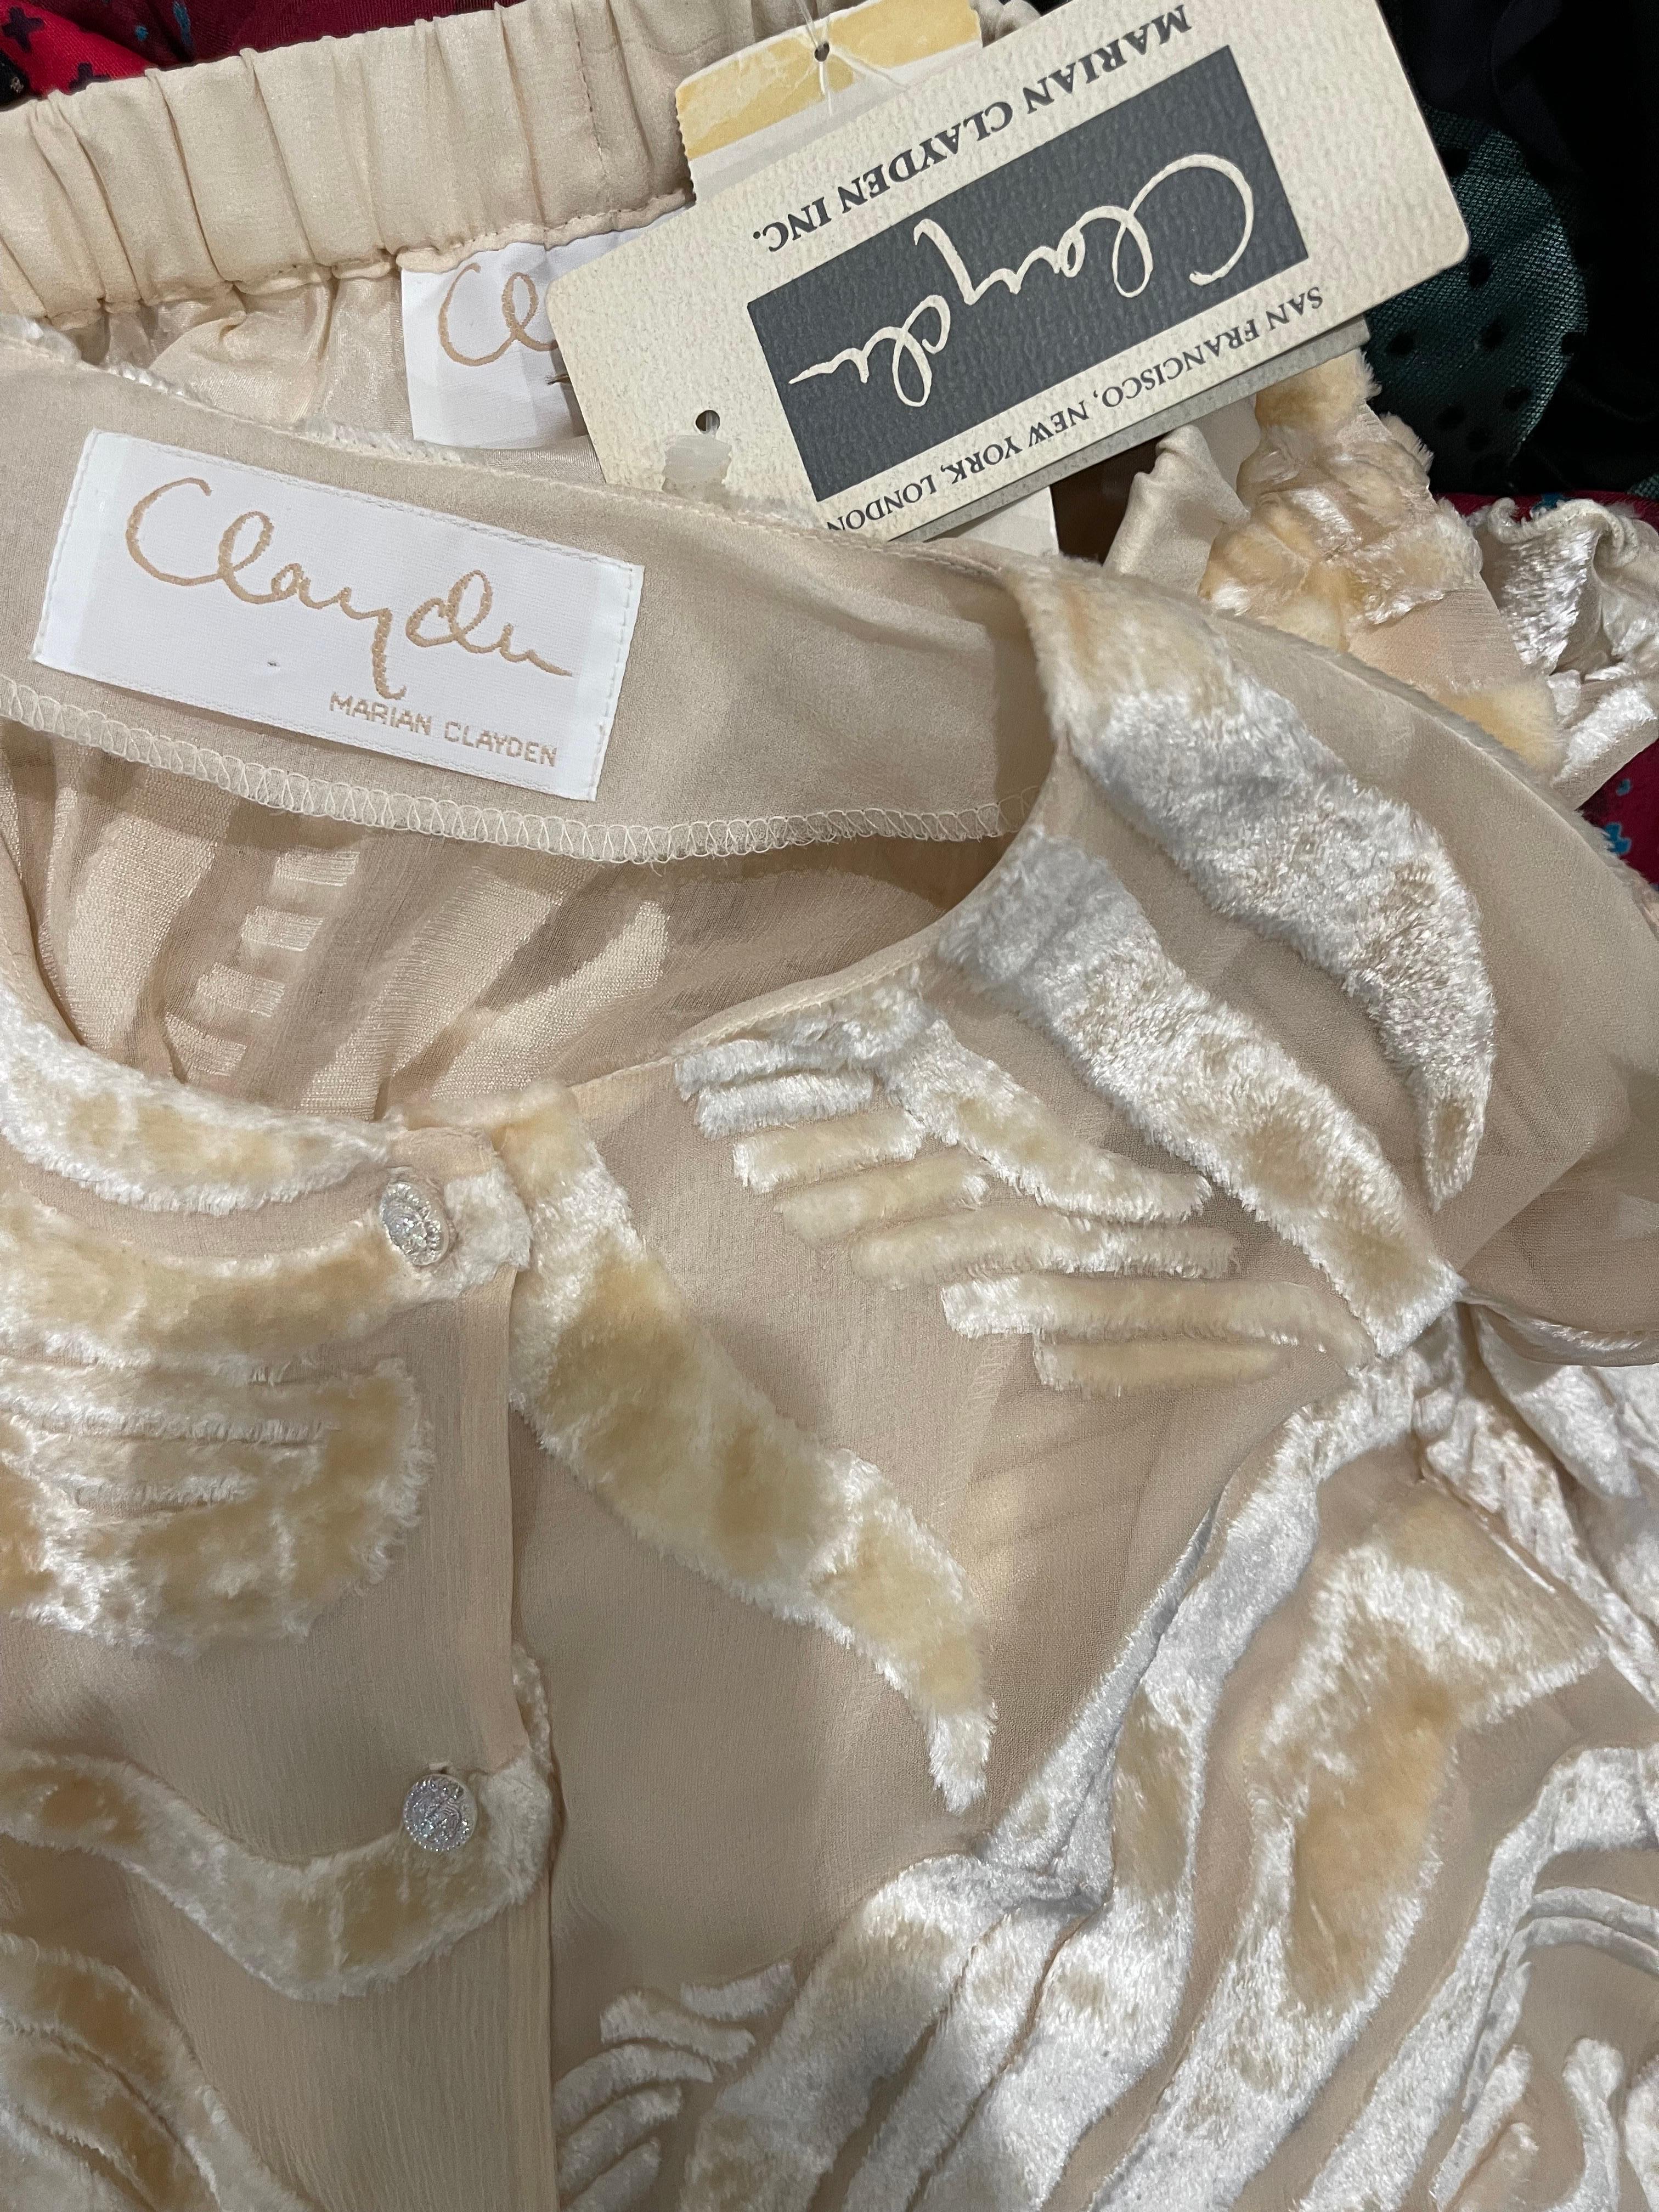 New with tags MARIAN CLAYDEN Fall 2000 ivory silk devore semi sheer blouse and skirt ensemble ! Shirt is unlined, and skirt is lined. Buttons u the front of the blouse. Skirt has an elastic waistband. Gathers at the right hem look amazing when